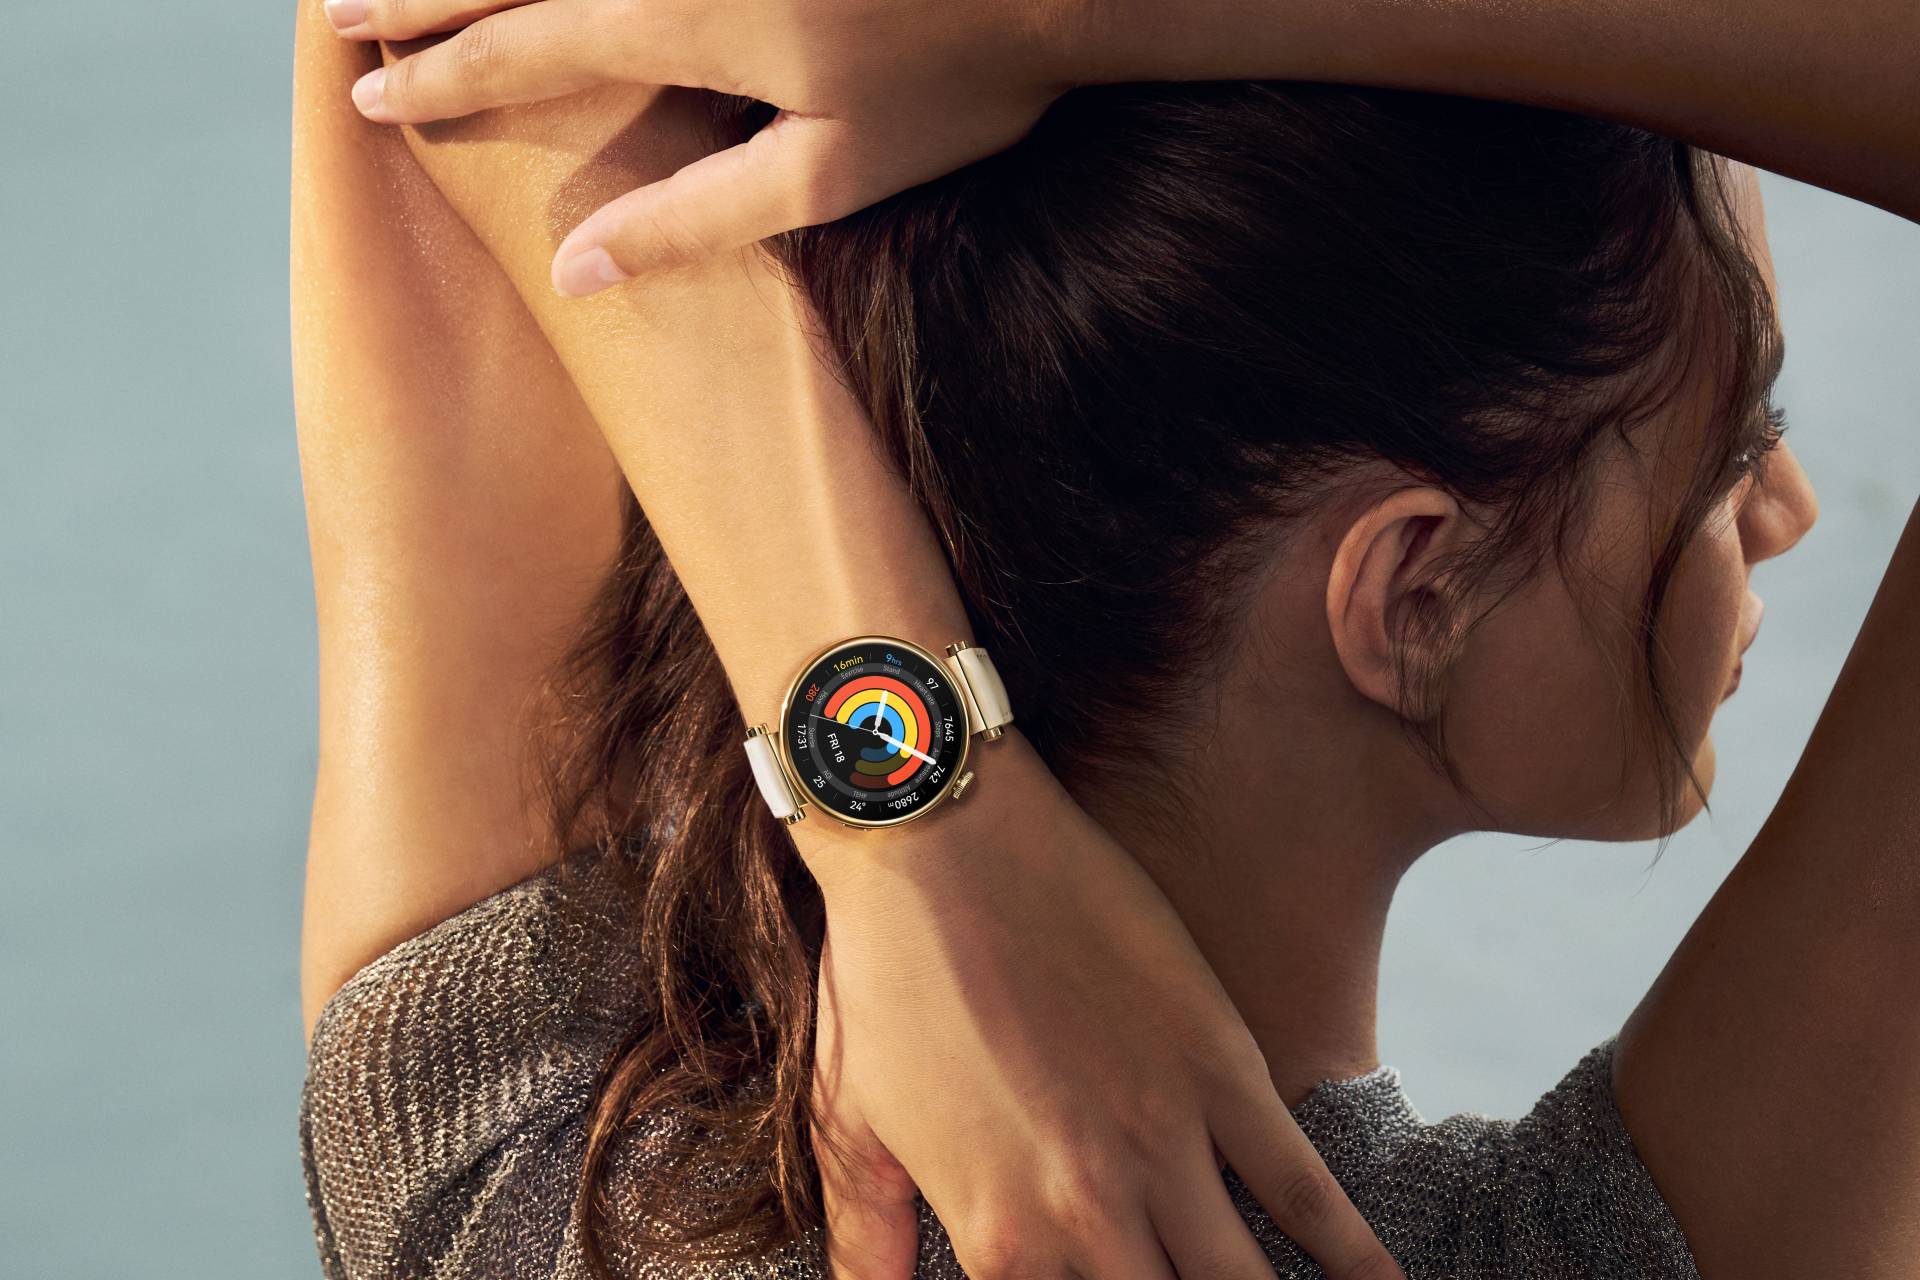 Huawei Watch GT4 Brings More Battery Life and Better Health Tracking